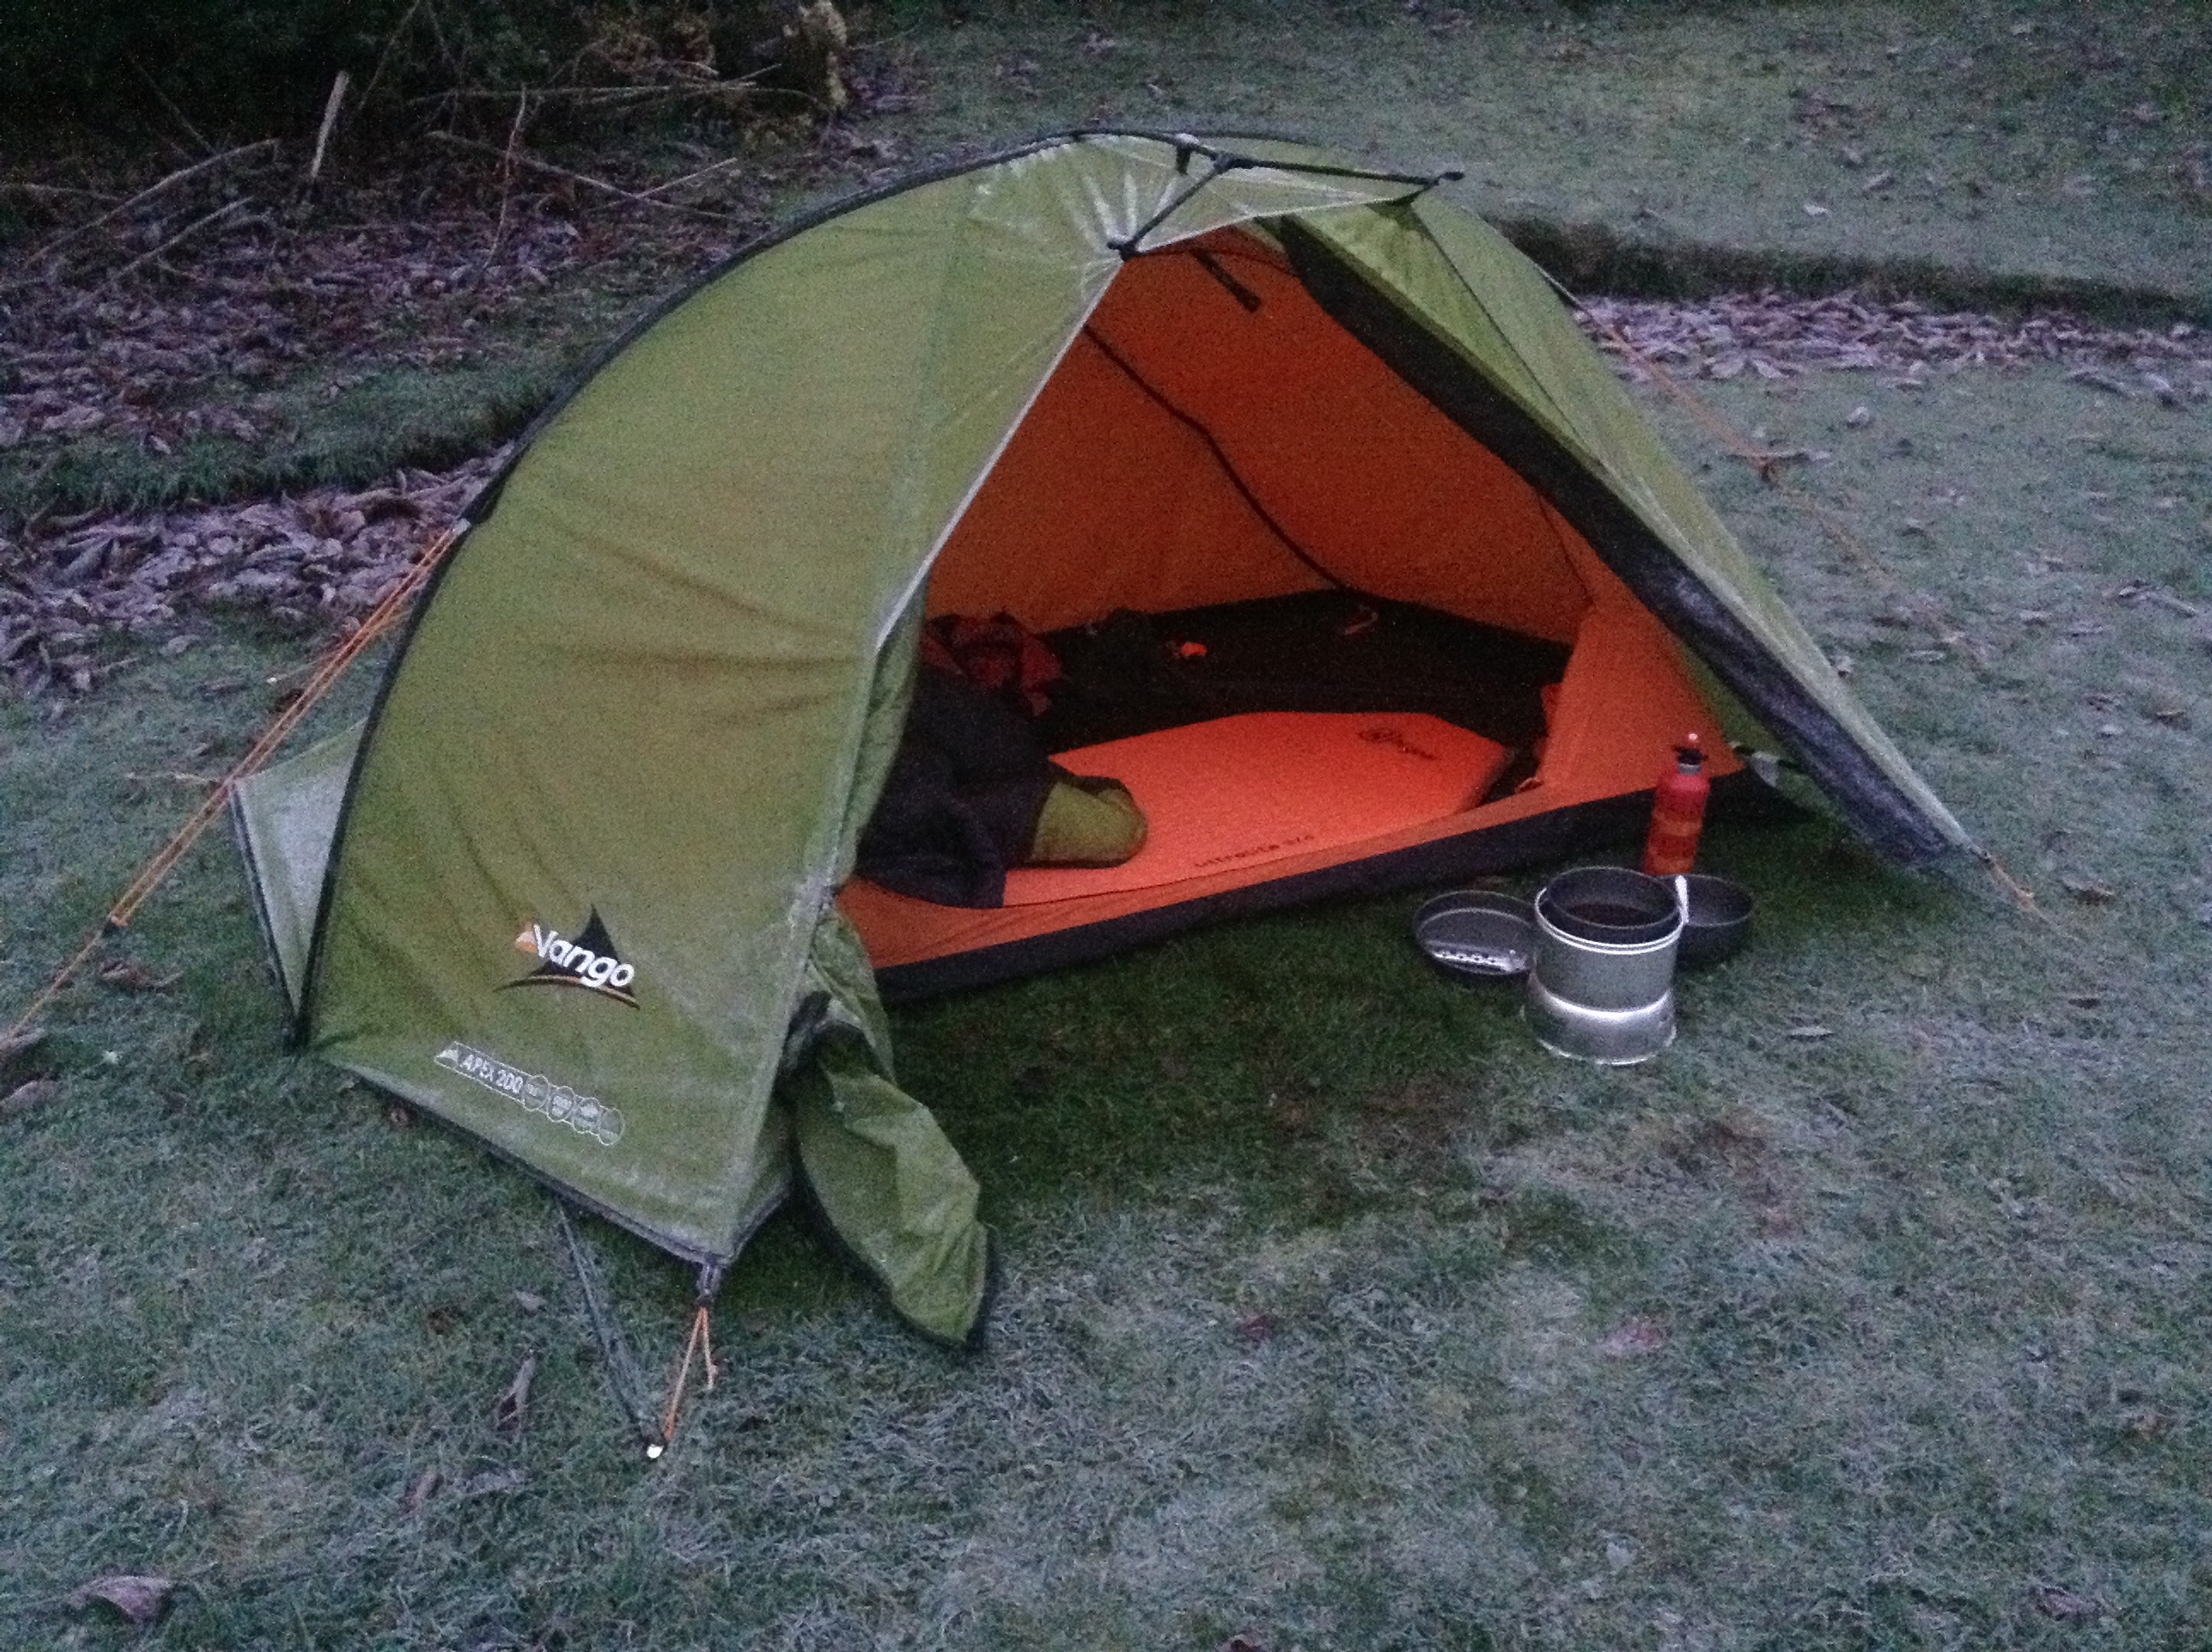 Microadventure – Camping in the Garden at -4 Celsius